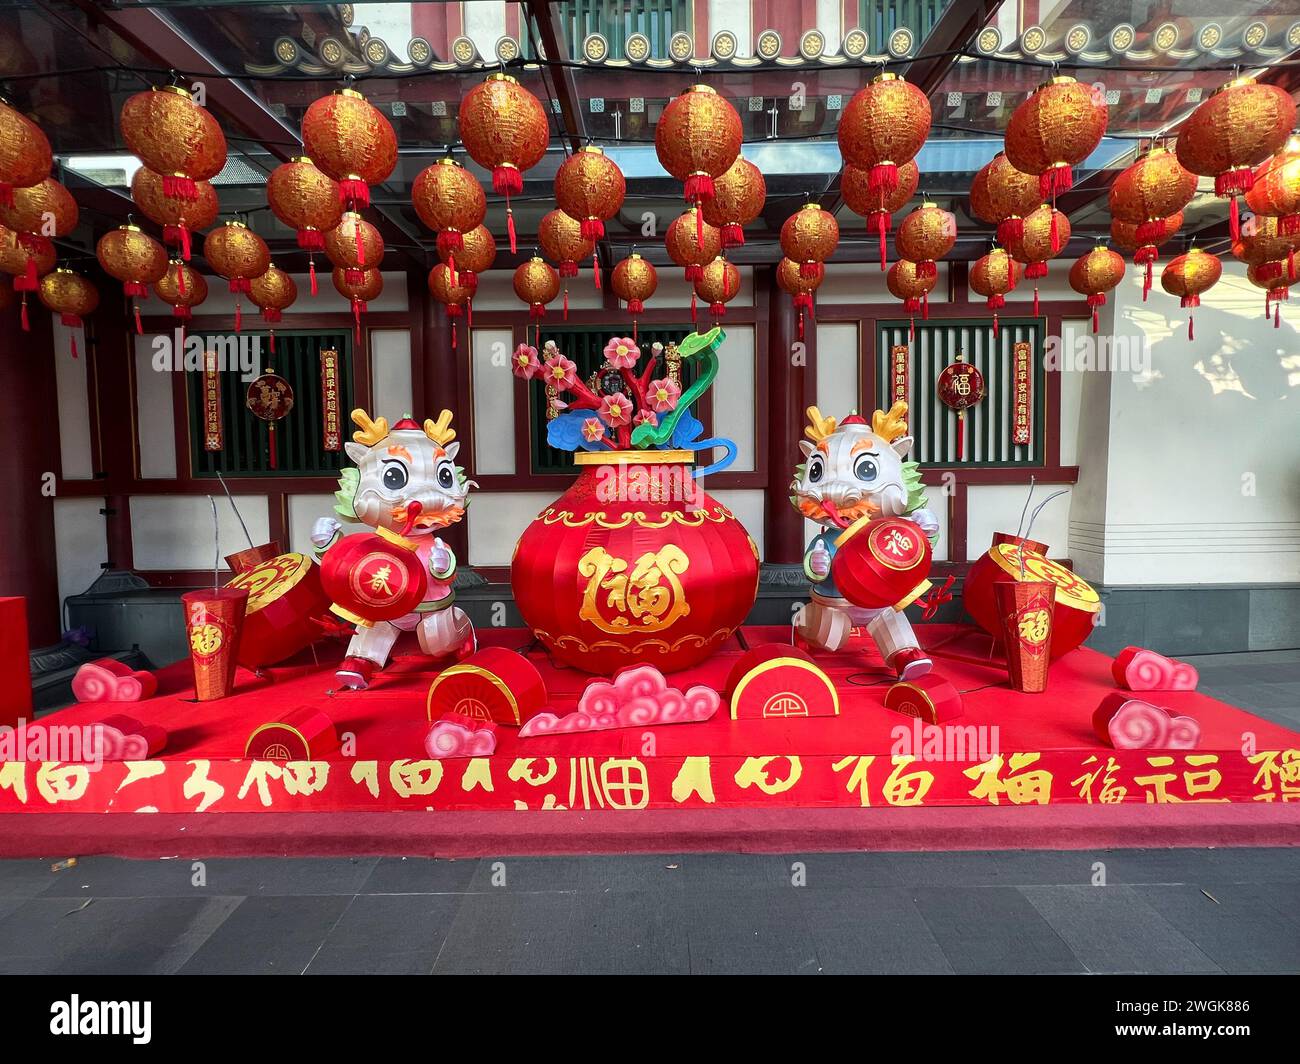 Singapore, Chinatown, preparation to the Chinese New Year, with bright red and gold decorations on display. Cute dragon installation. Stock Photo